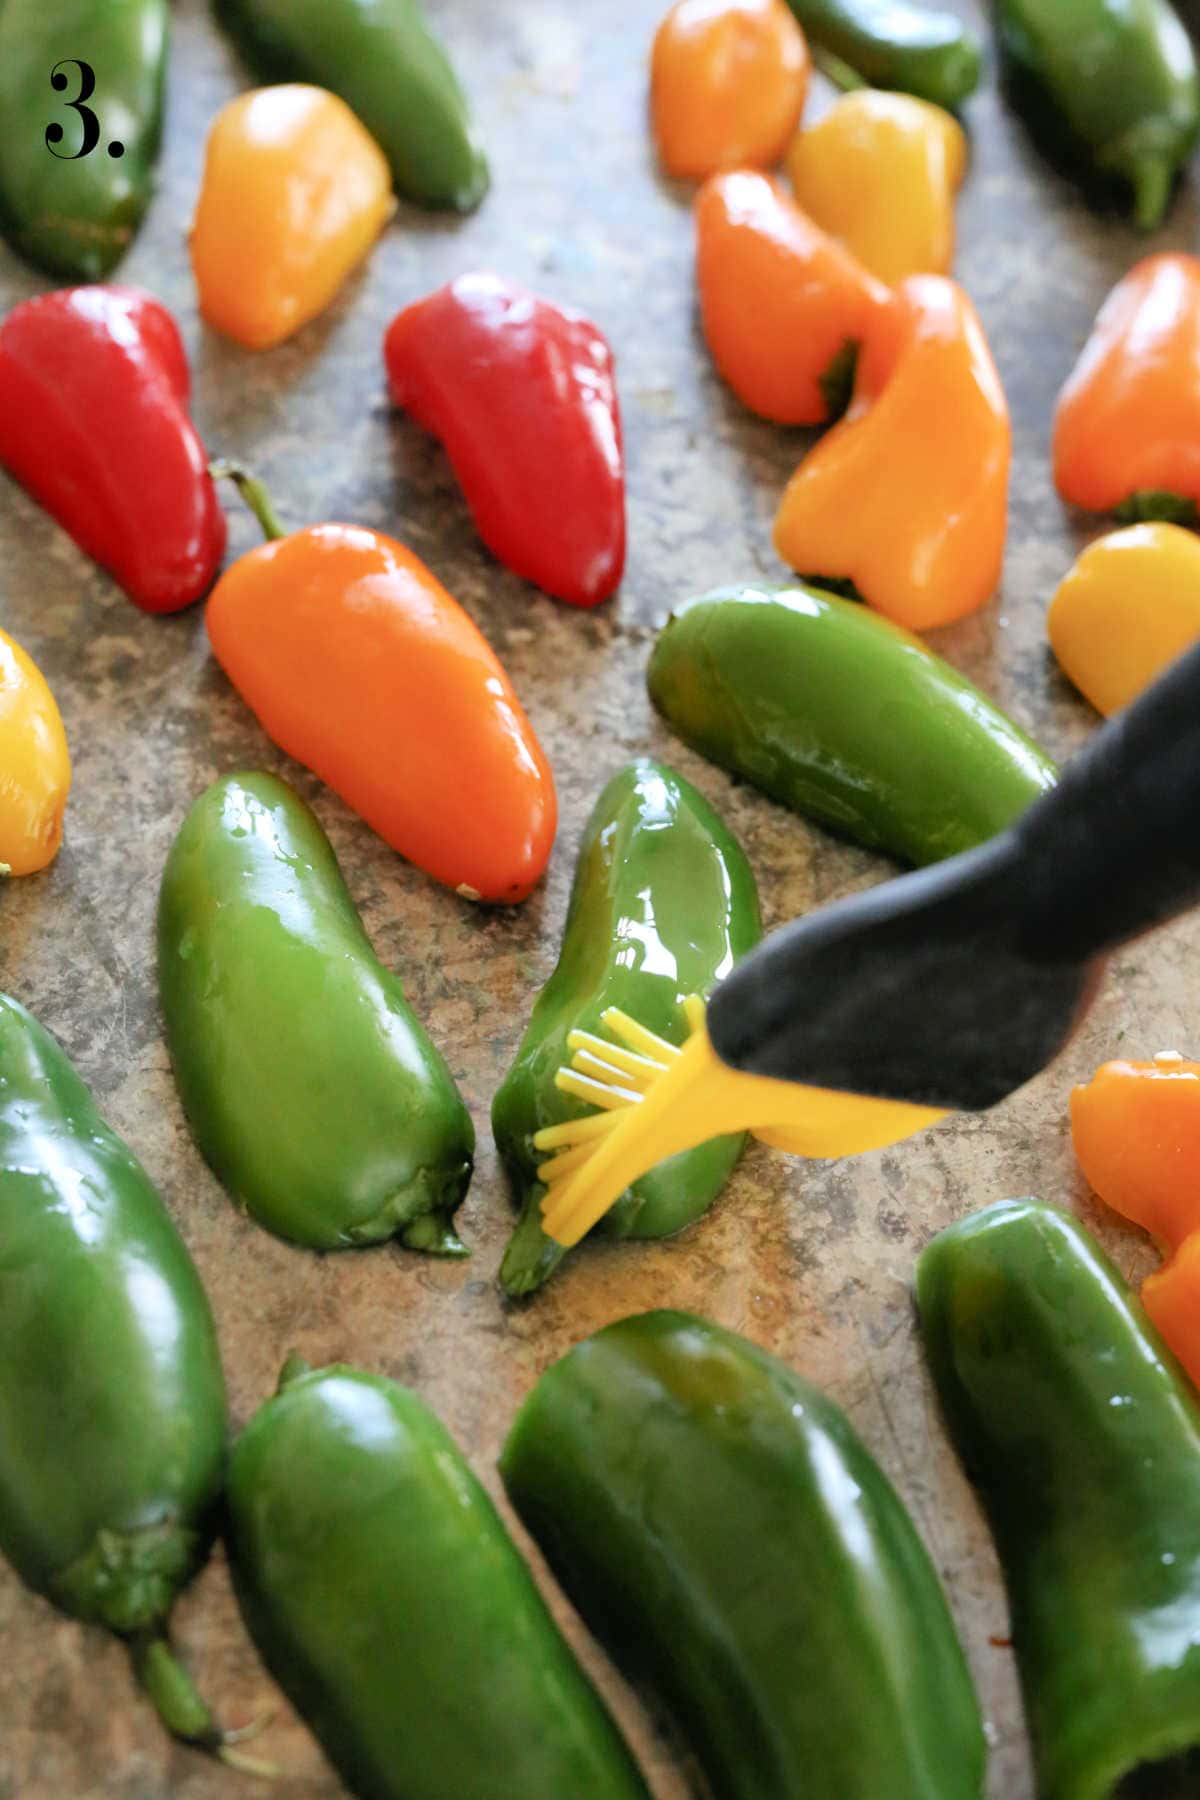 Basting jalapenos and sweet mini peppers with olive oil.